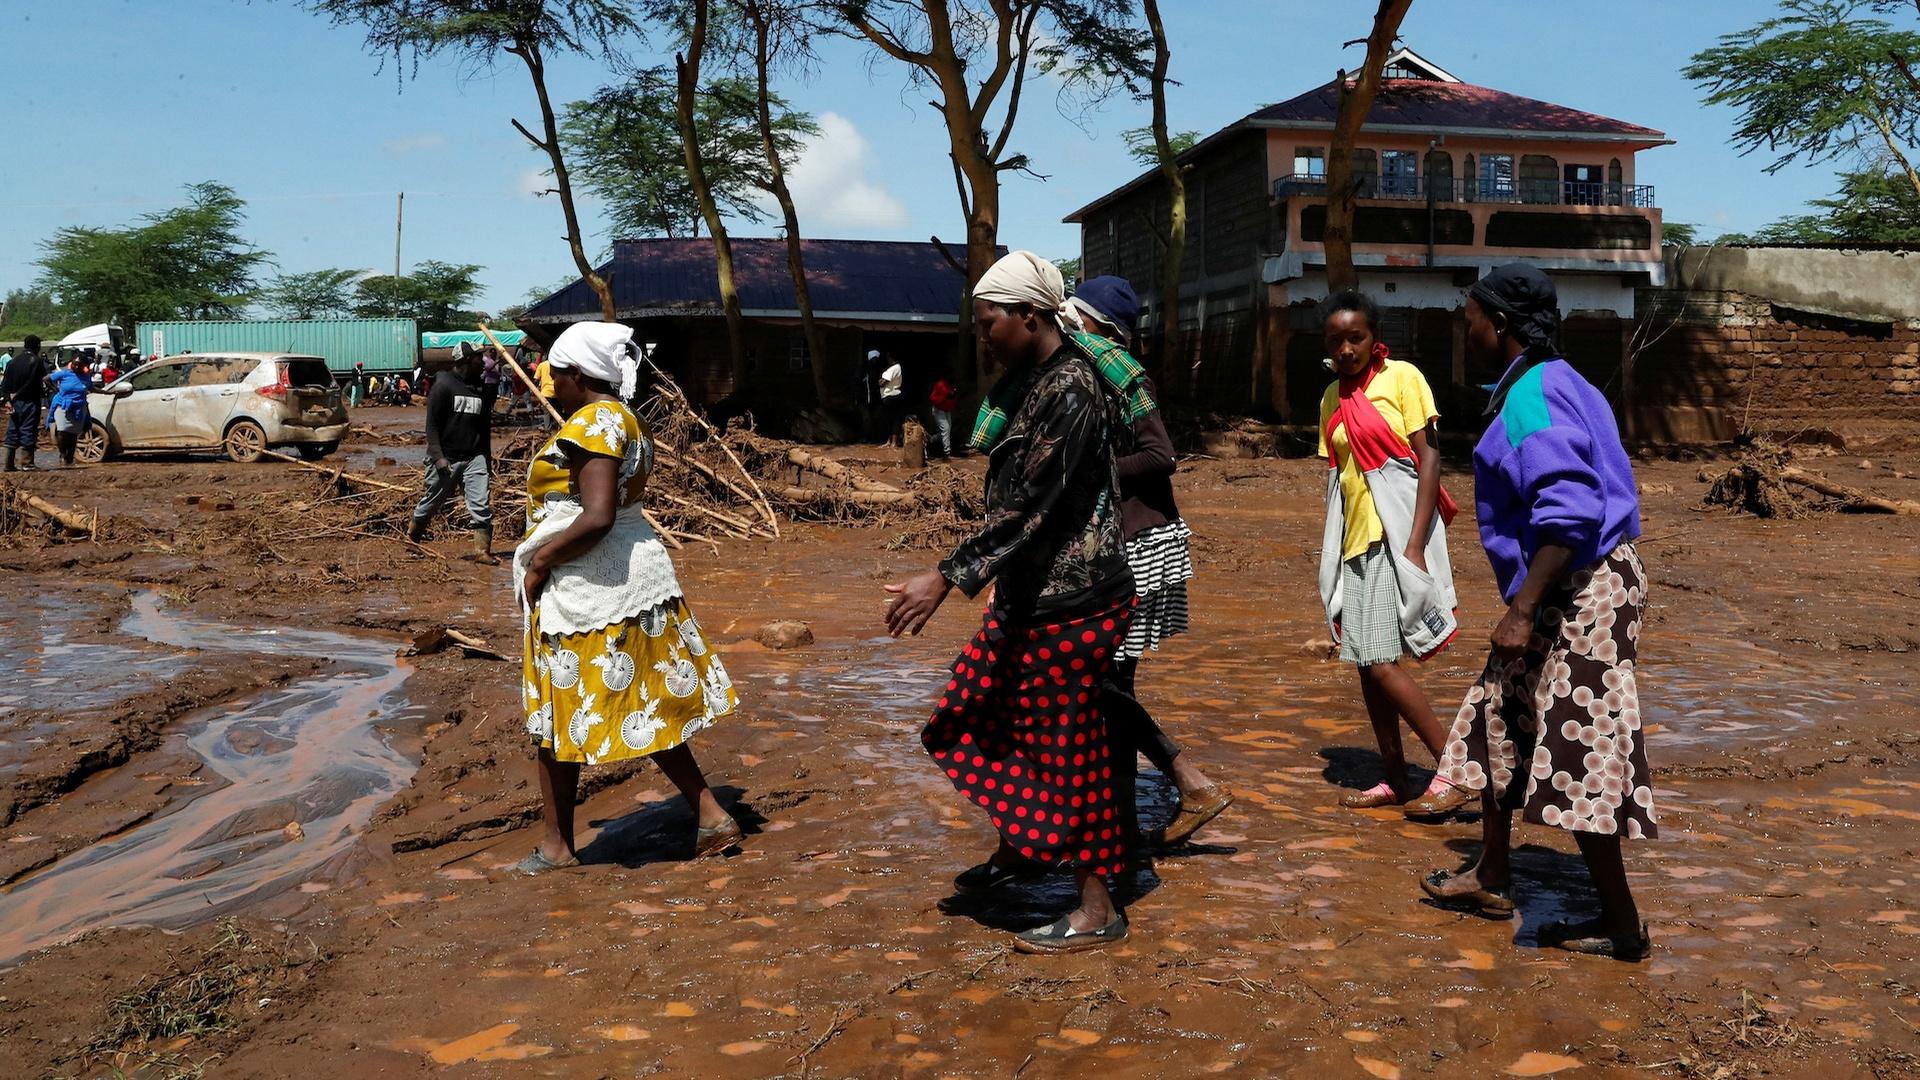 News Wrap: At least 45 killed by flooding in western Kenya | PBS ...